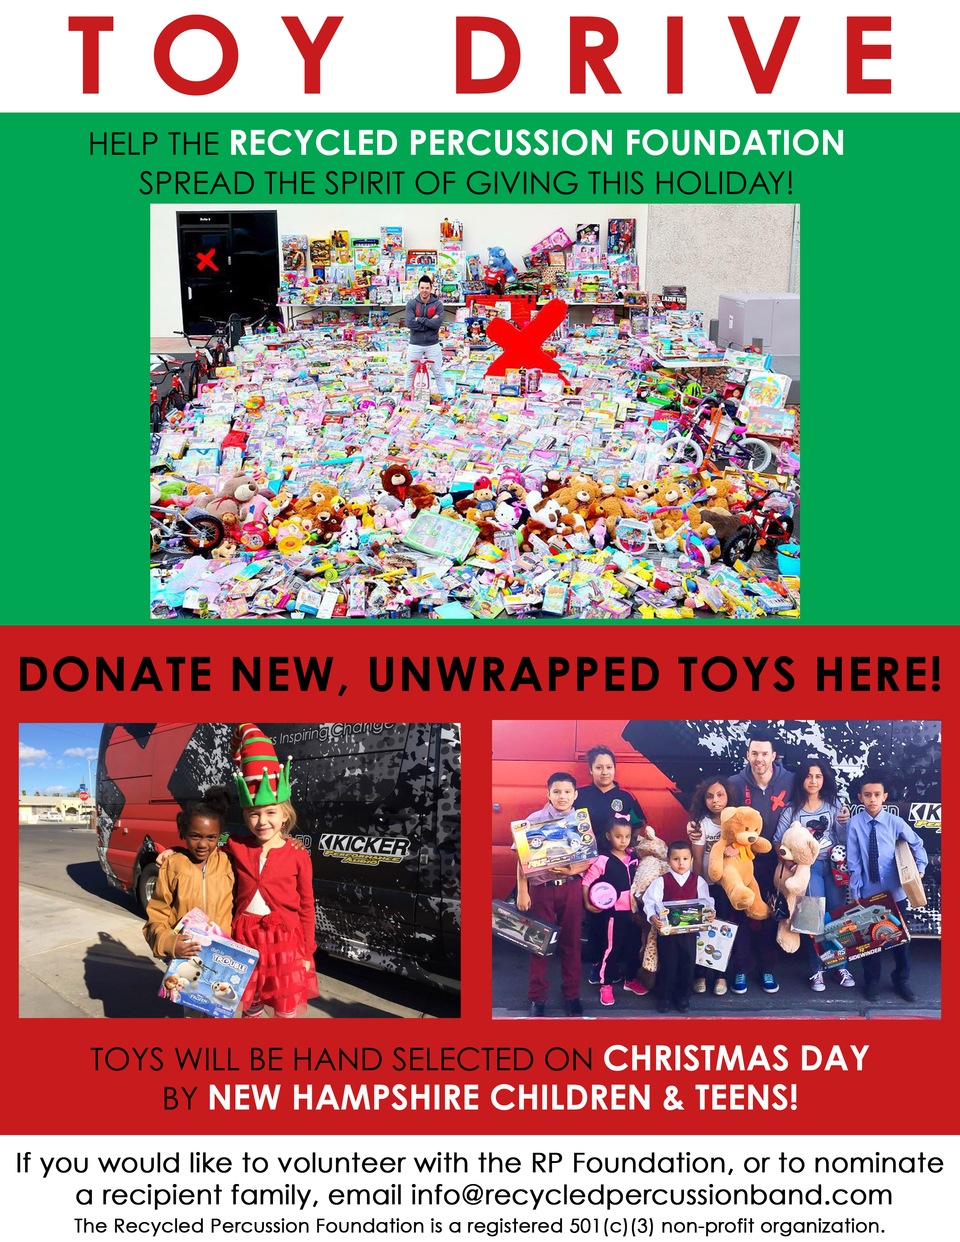 Reminder about our Toy Drive with Recycled Percussion Foundation at Integrity Health Coaching Centers in NH